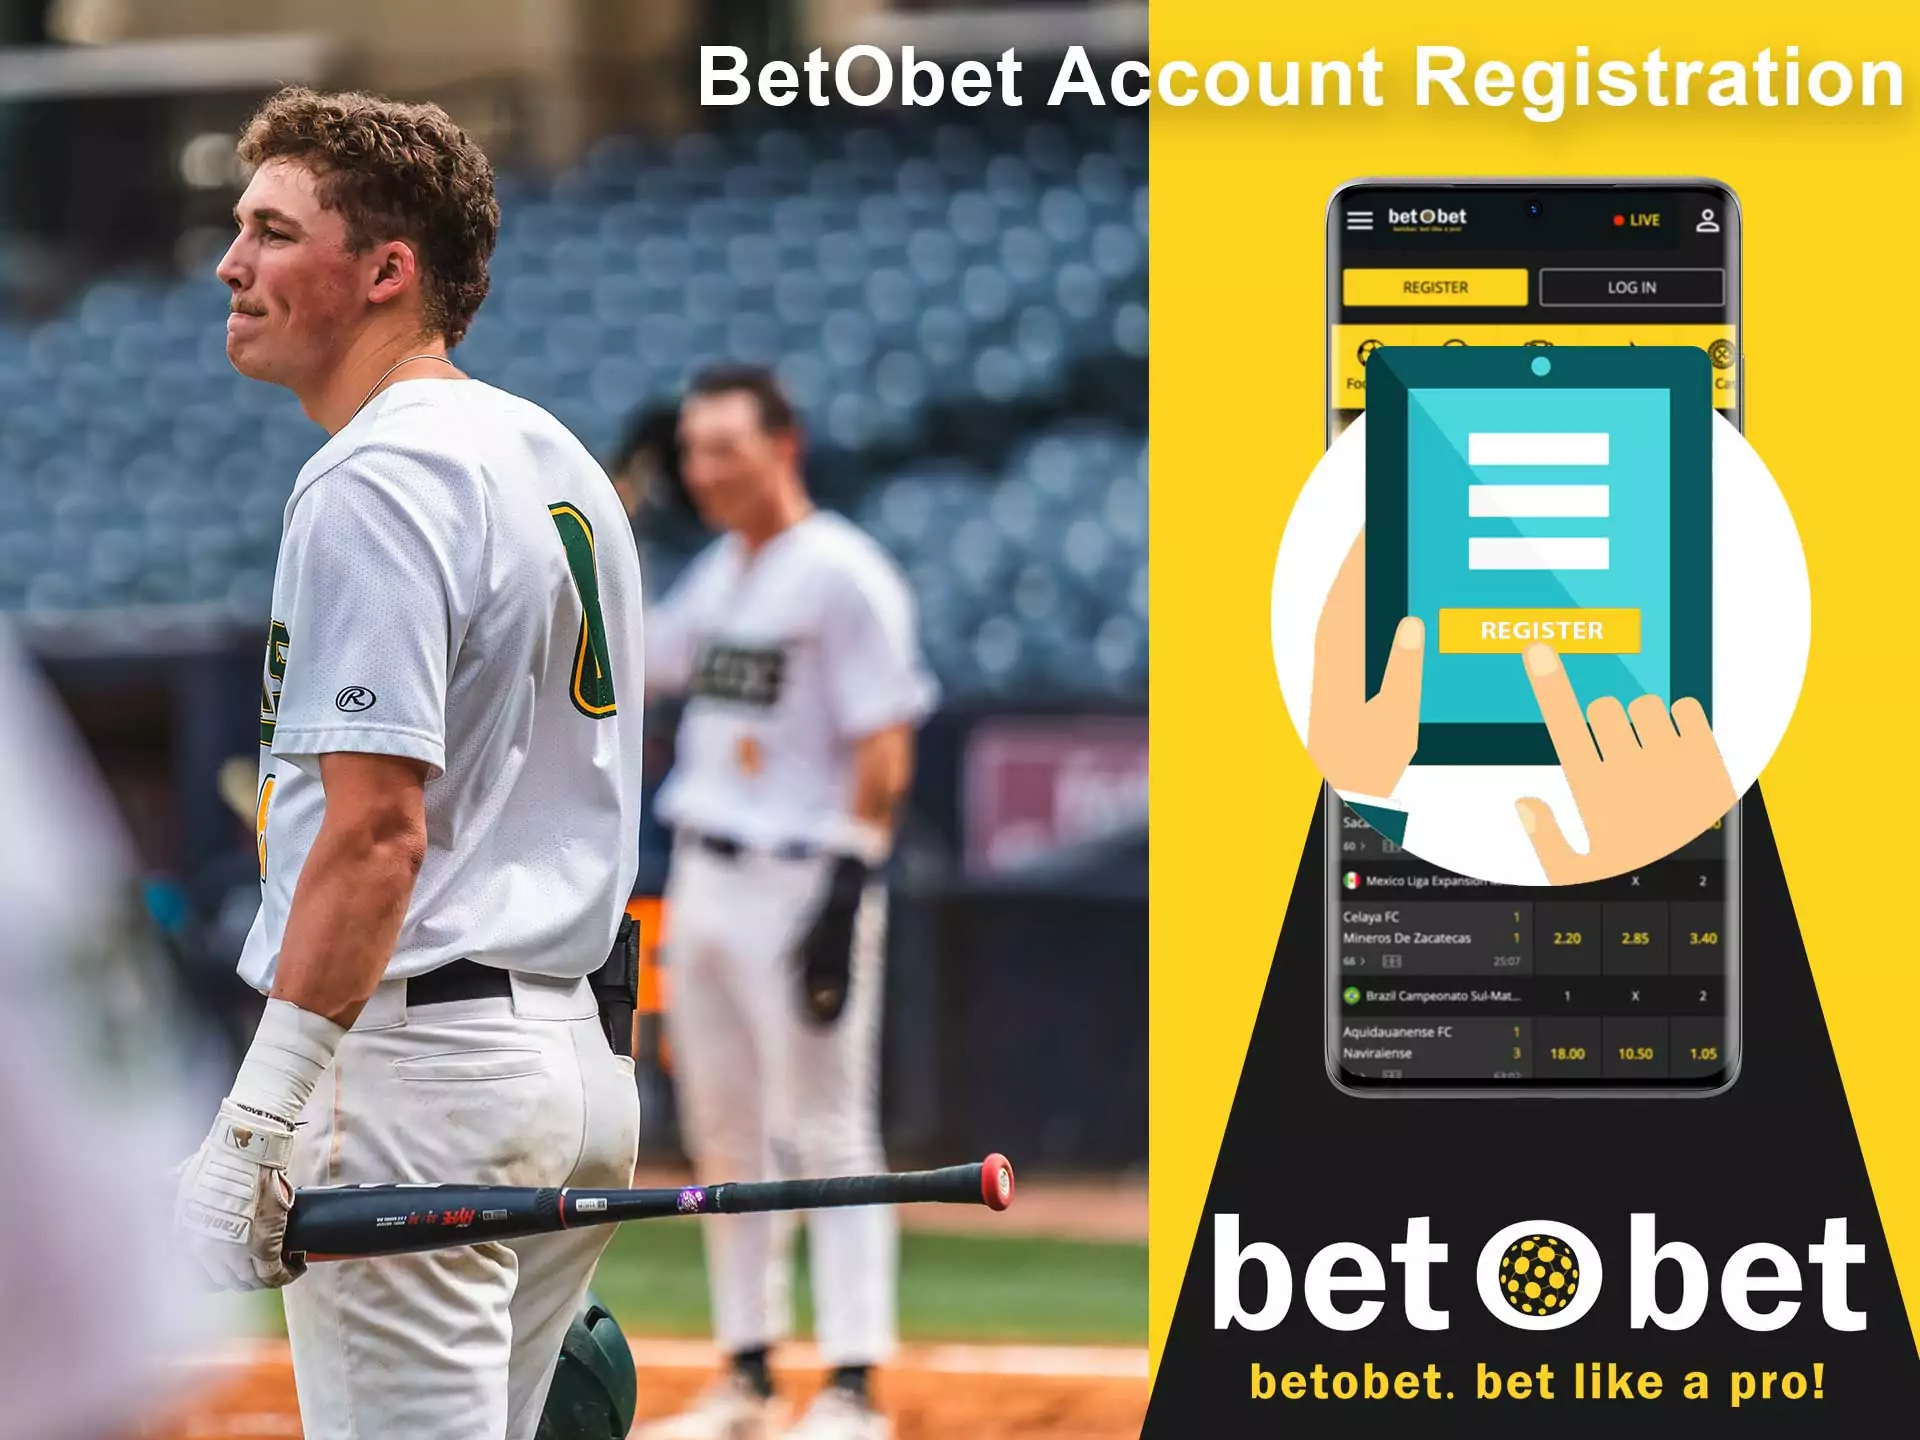 Betobet offers a simple new account registration.